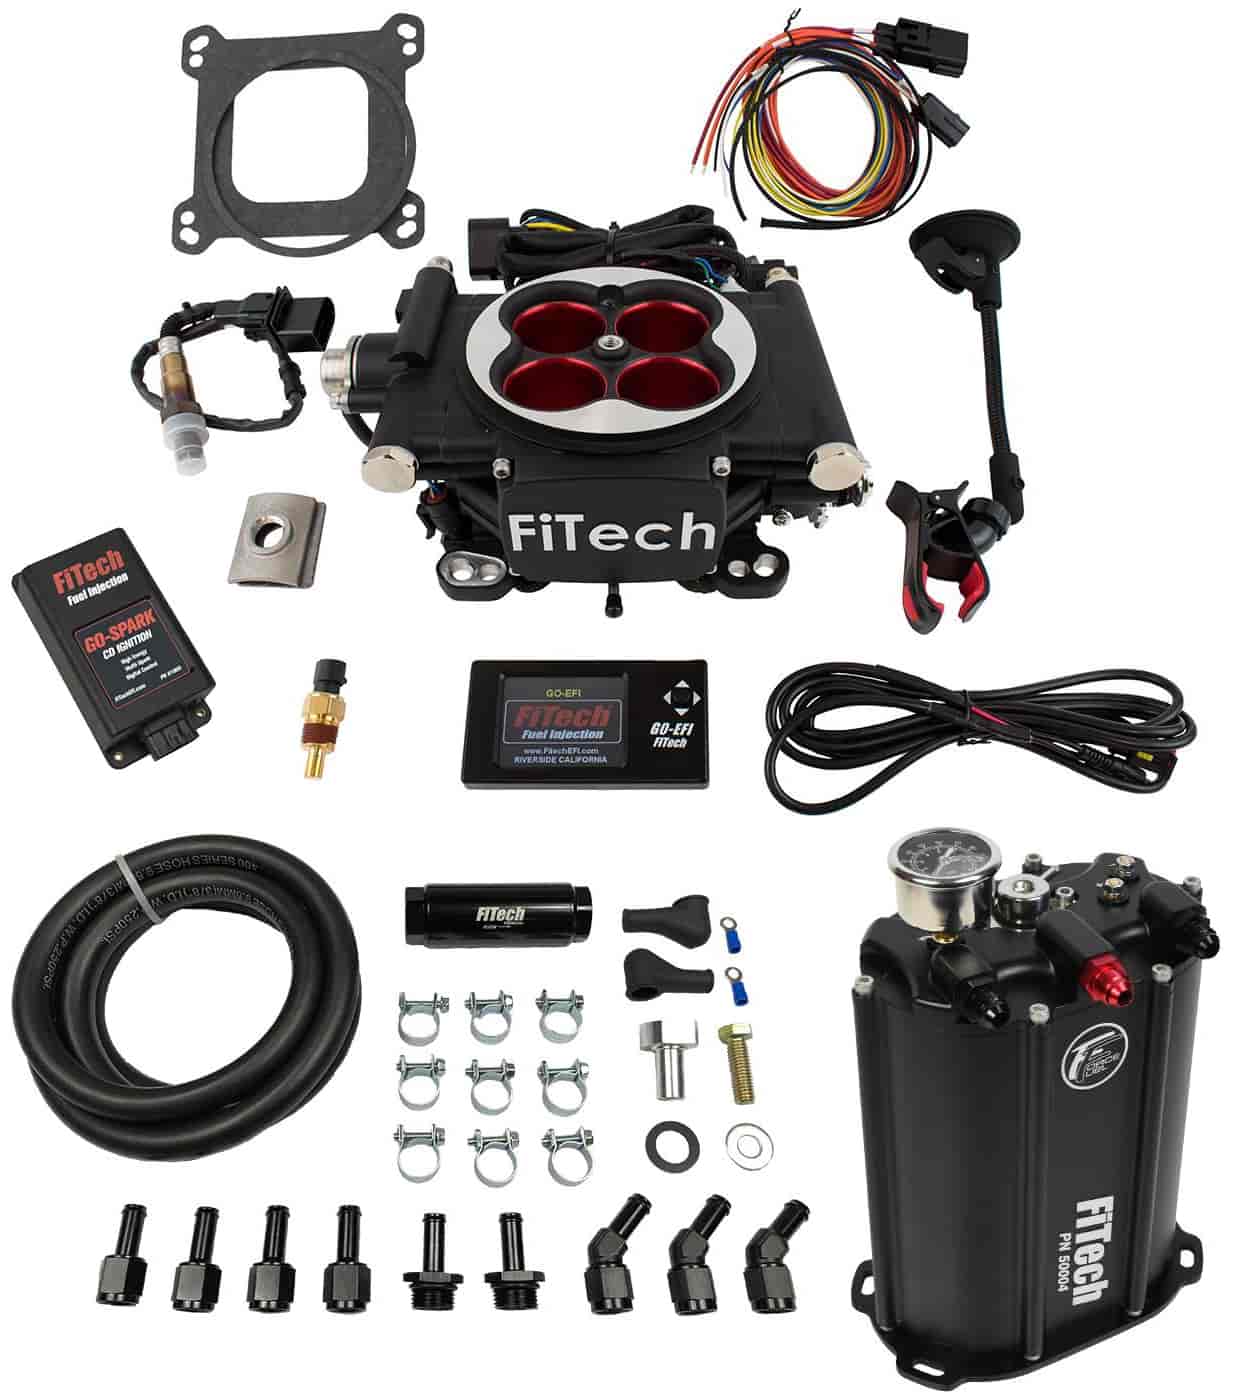 Go EFI-4 Power Adder 600 HP Throttle Body Fuel Injection Master Kit [with Force Fuel System & CDI Box] Matte Black